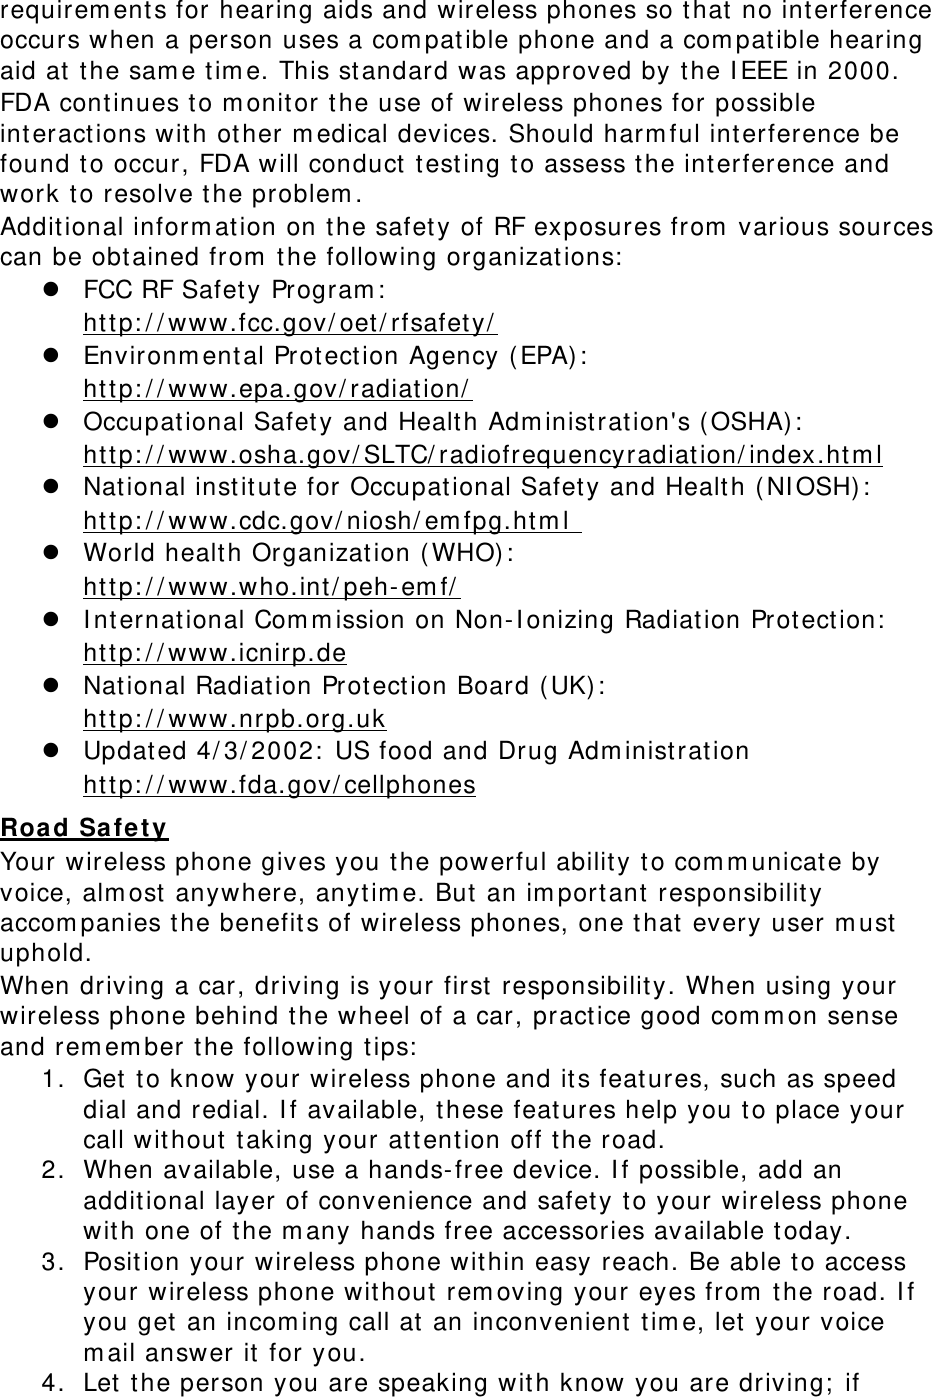 requirements for hearing aids and wireless phones so that no interference occurs when a person uses a compatible phone and a compatible hearing aid at the same time. This standard was approved by the IEEE in 2000. FDA continues to monitor the use of wireless phones for possible interactions with other medical devices. Should harmful interference be found to occur, FDA will conduct testing to assess the interference and work to resolve the problem. Additional information on the safety of RF exposures from various sources can be obtained from the following organizations:  FCC RF Safety Program:  http://www.fcc.gov/oet/rfsafety/  Environmental Protection Agency (EPA):  http://www.epa.gov/radiation/  Occupational Safety and Health Administration&apos;s (OSHA):        http://www.osha.gov/SLTC/radiofrequencyradiation/index.html  National institute for Occupational Safety and Health (NIOSH):  http://www.cdc.gov/niosh/emfpg.html   World health Organization (WHO):  http://www.who.int/peh-emf/  International Commission on Non-Ionizing Radiation Protection:  http://www.icnirp.de  National Radiation Protection Board (UK):  http://www.nrpb.org.uk  Updated 4/3/2002: US food and Drug Administration  http://www.fda.gov/cellphones Road Safety Your wireless phone gives you the powerful ability to communicate by voice, almost anywhere, anytime. But an important responsibility accompanies the benefits of wireless phones, one that every user must uphold. When driving a car, driving is your first responsibility. When using your wireless phone behind the wheel of a car, practice good common sense and remember the following tips: 1. Get to know your wireless phone and its features, such as speed dial and redial. If available, these features help you to place your call without taking your attention off the road. 2. When available, use a hands-free device. If possible, add an additional layer of convenience and safety to your wireless phone with one of the many hands free accessories available today. 3. Position your wireless phone within easy reach. Be able to access your wireless phone without removing your eyes from the road. If you get an incoming call at an inconvenient time, let your voice mail answer it for you. 4. Let the person you are speaking with know you are driving; if 